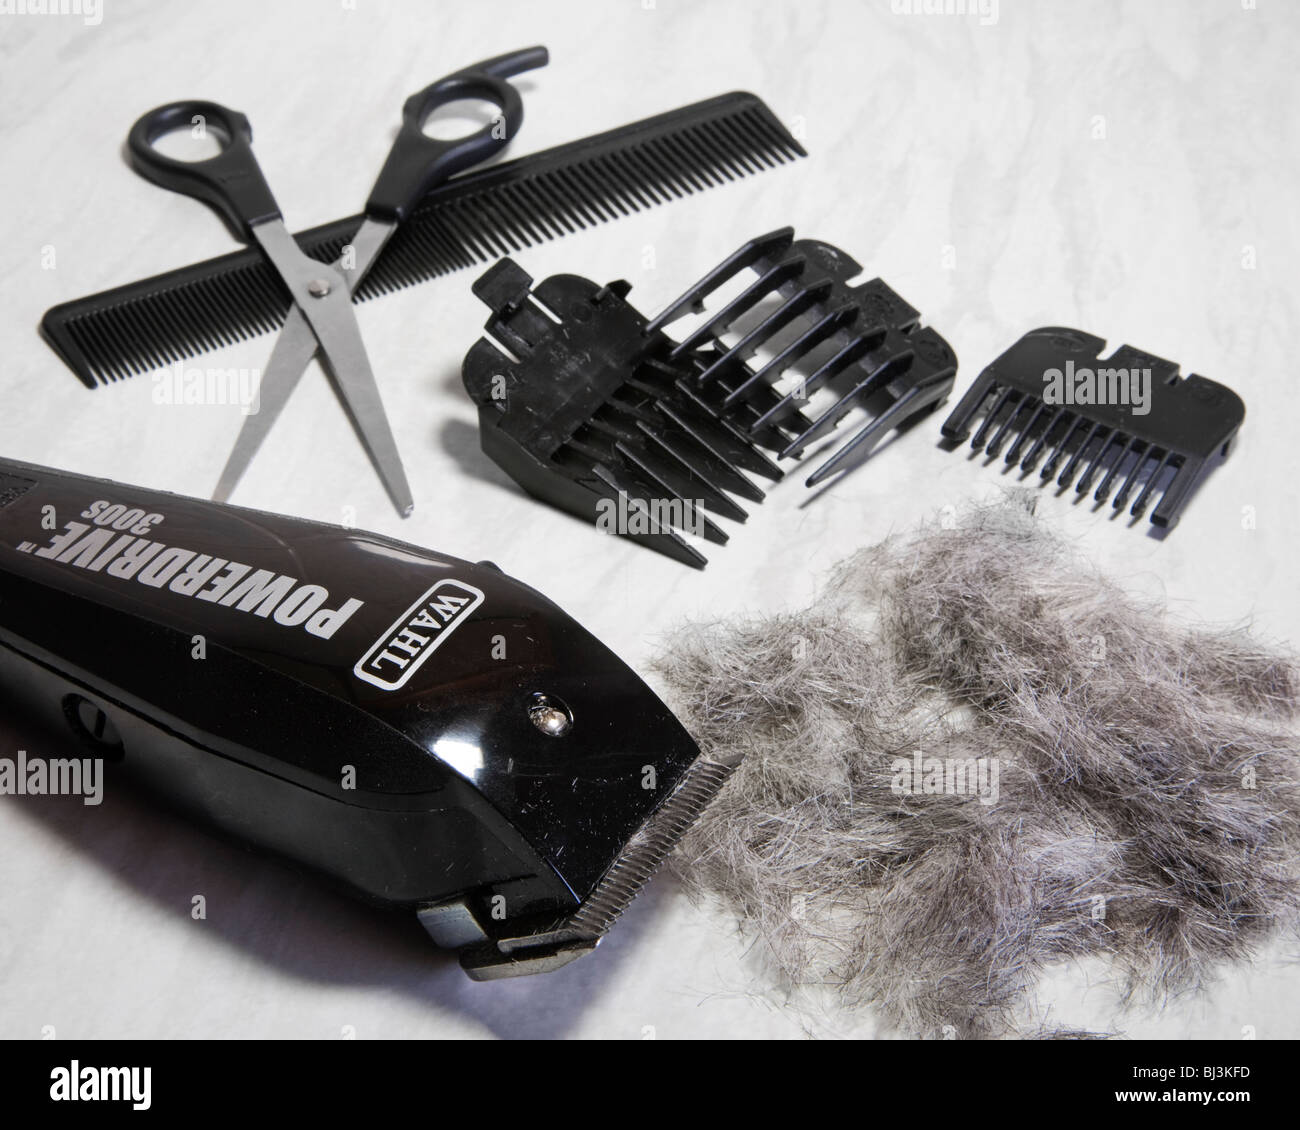 wahl hair trimmer combs